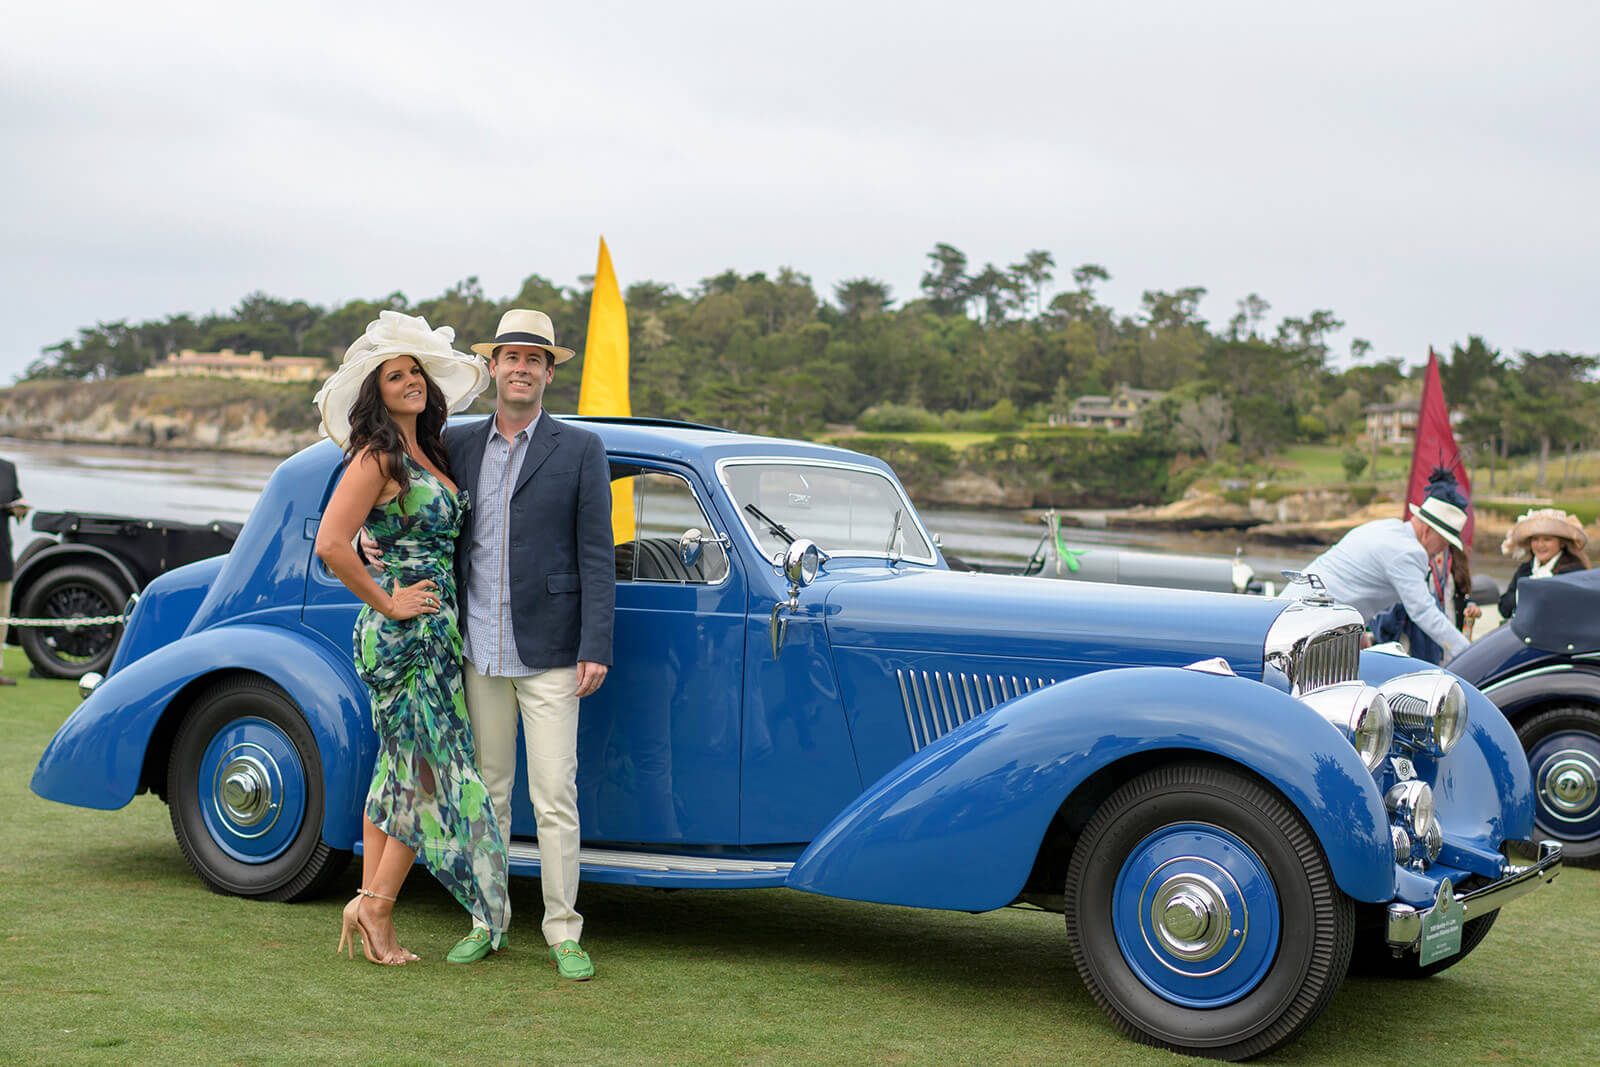 Fashion and Style found around Pebble Beach Concours d'Elegance